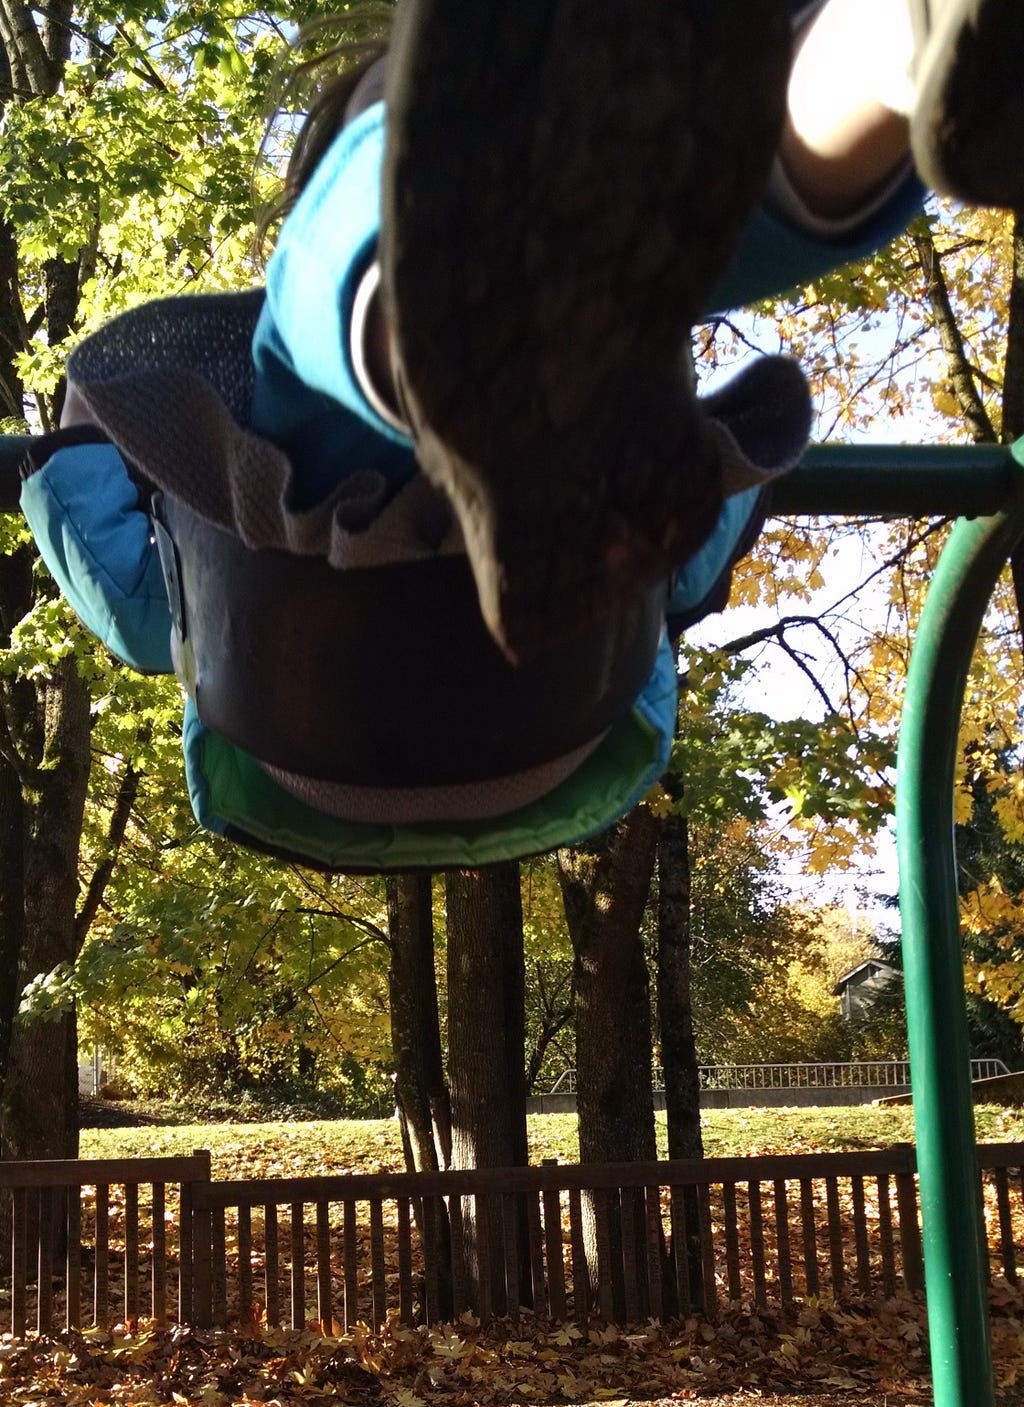 Person on park swing, feet and lower half of body mid-upward move